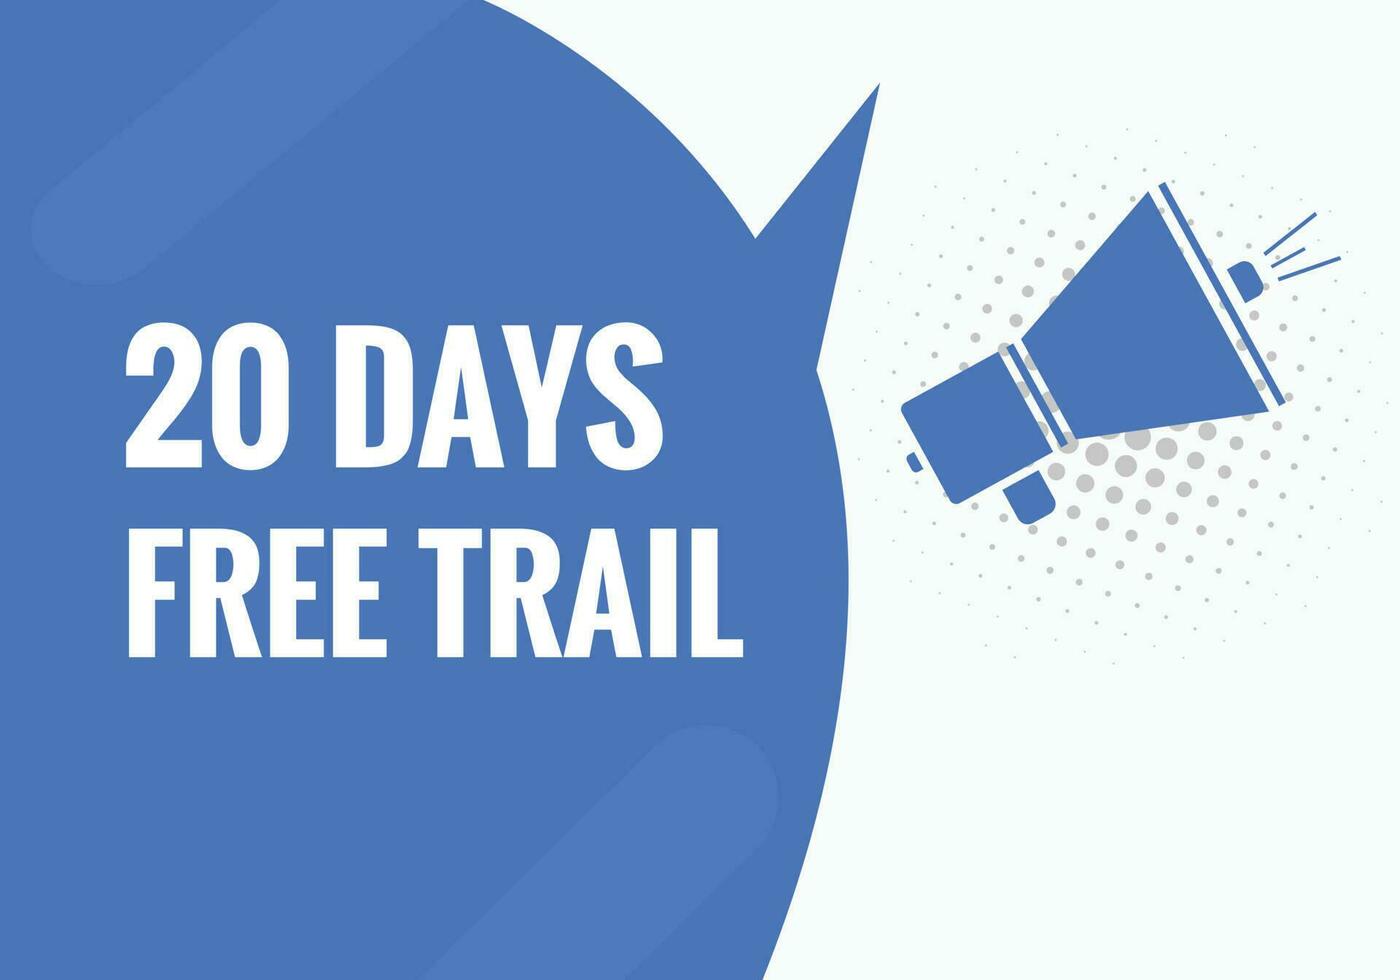 20 days Free trial Banner Design. 20 day free banner background vector